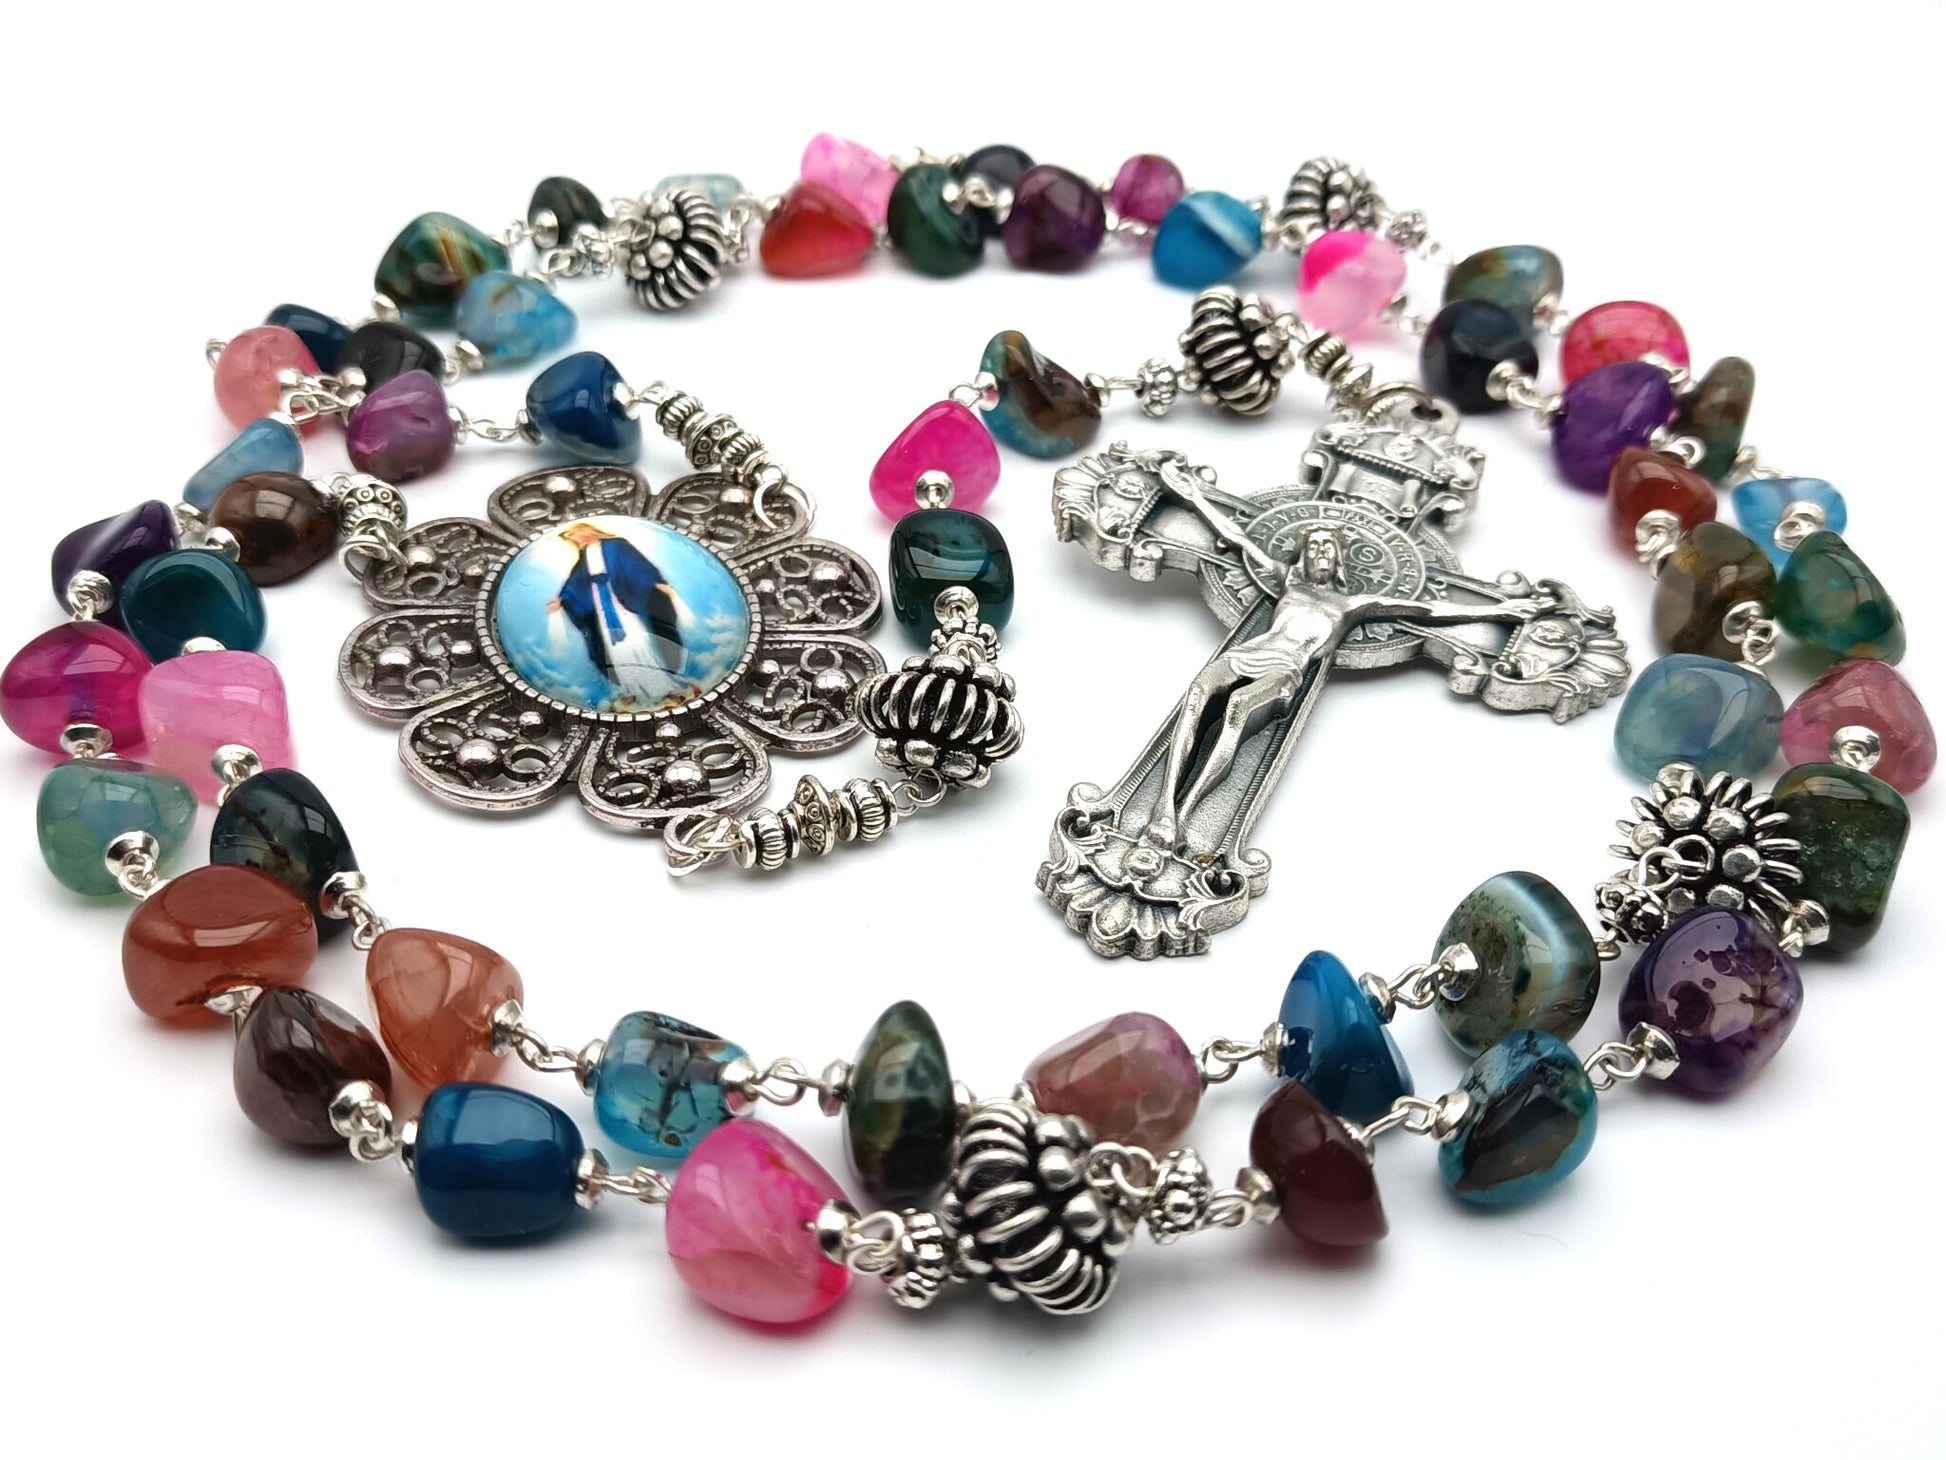 Our Lady of Grace unique rosary beads with agate gemstone beads, large Saint Benedict crucifix, silver pater beads and picture centre medal.